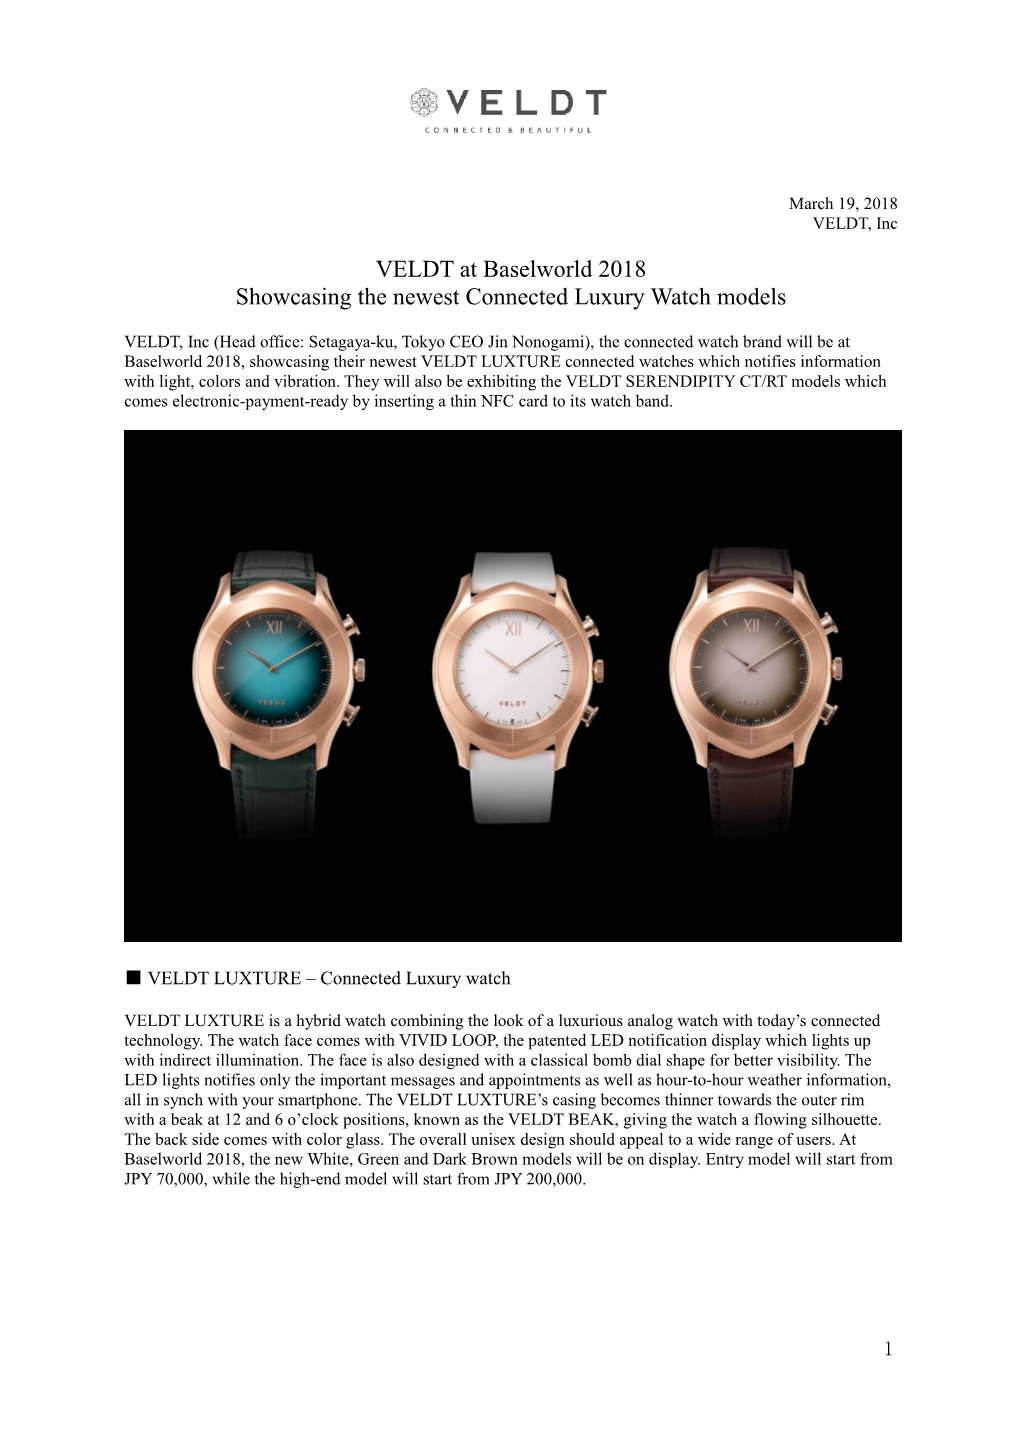 Showcasing the Newest Connected Luxury Watch Models